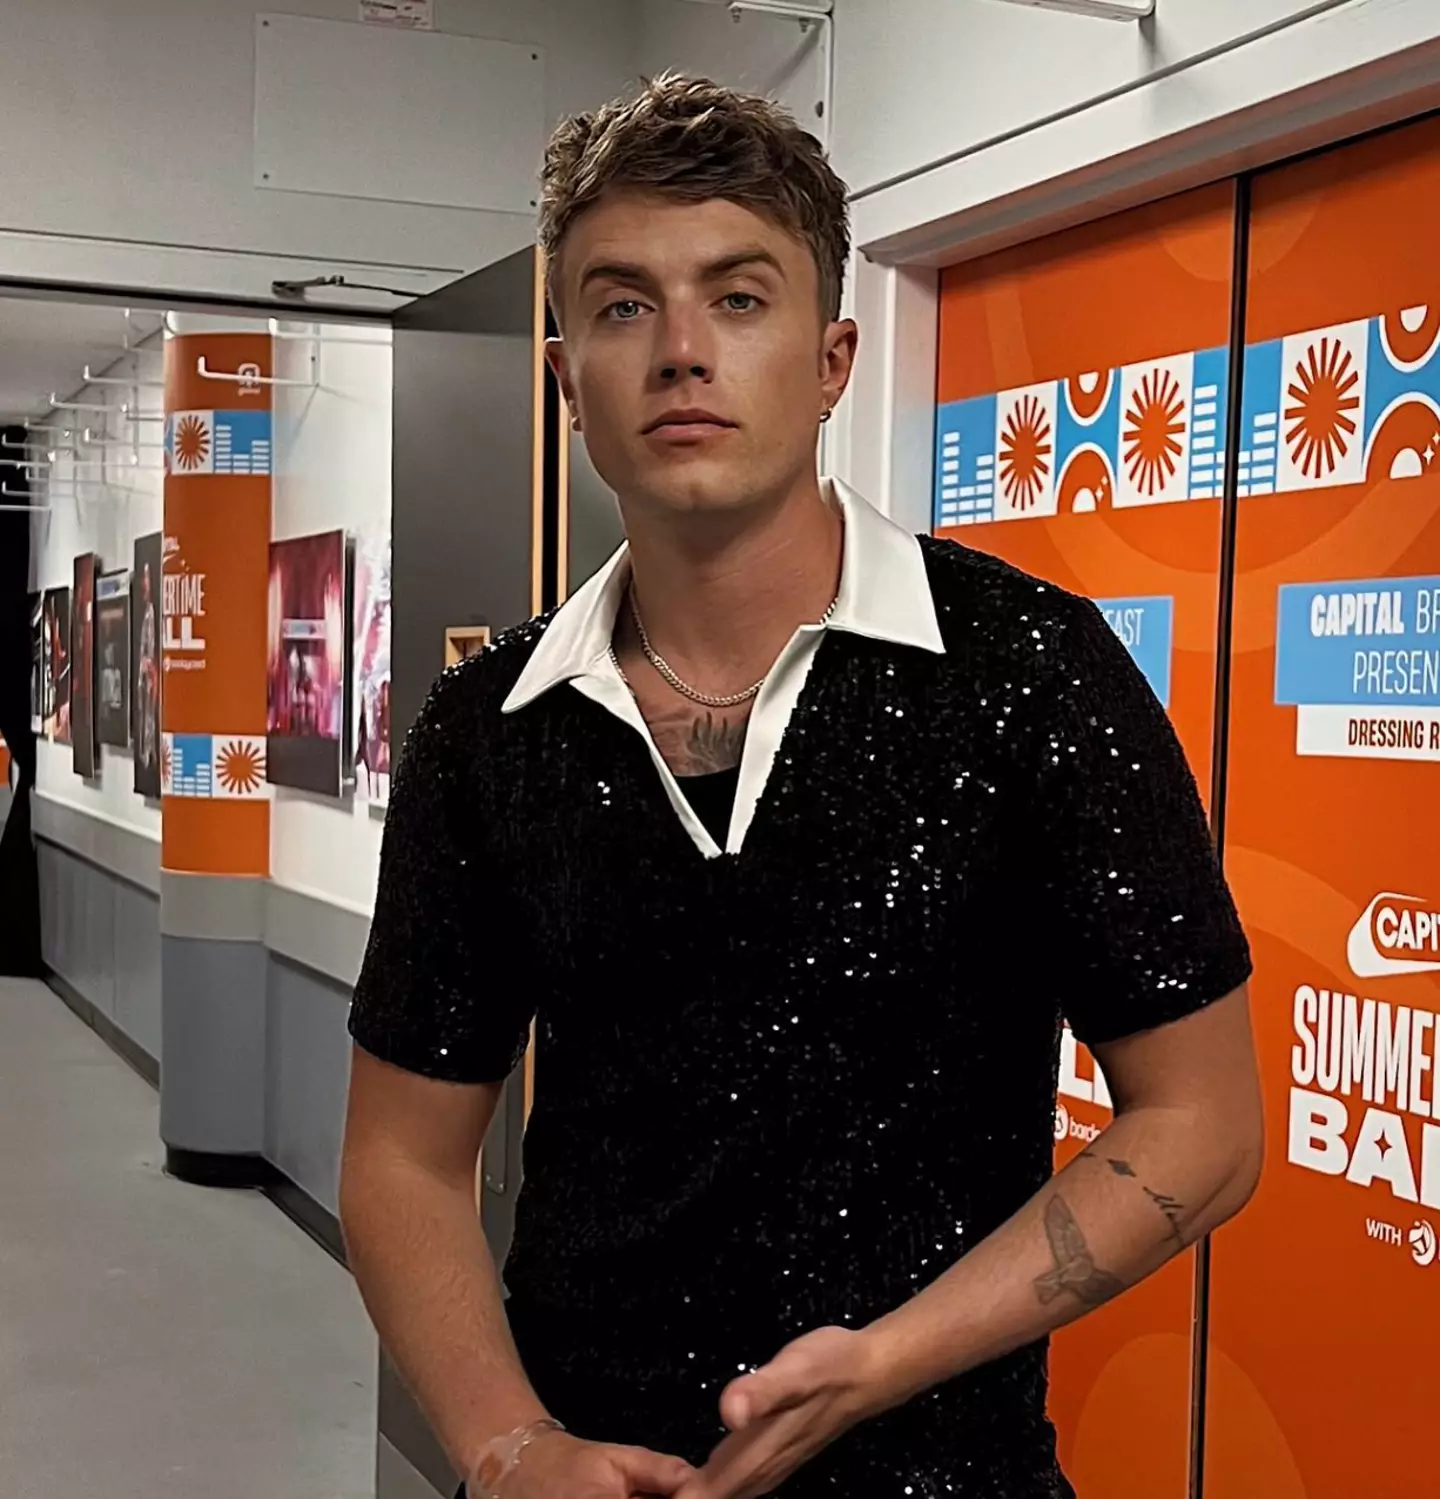 Roman Kemp has responded to the blunder in the best possible way.